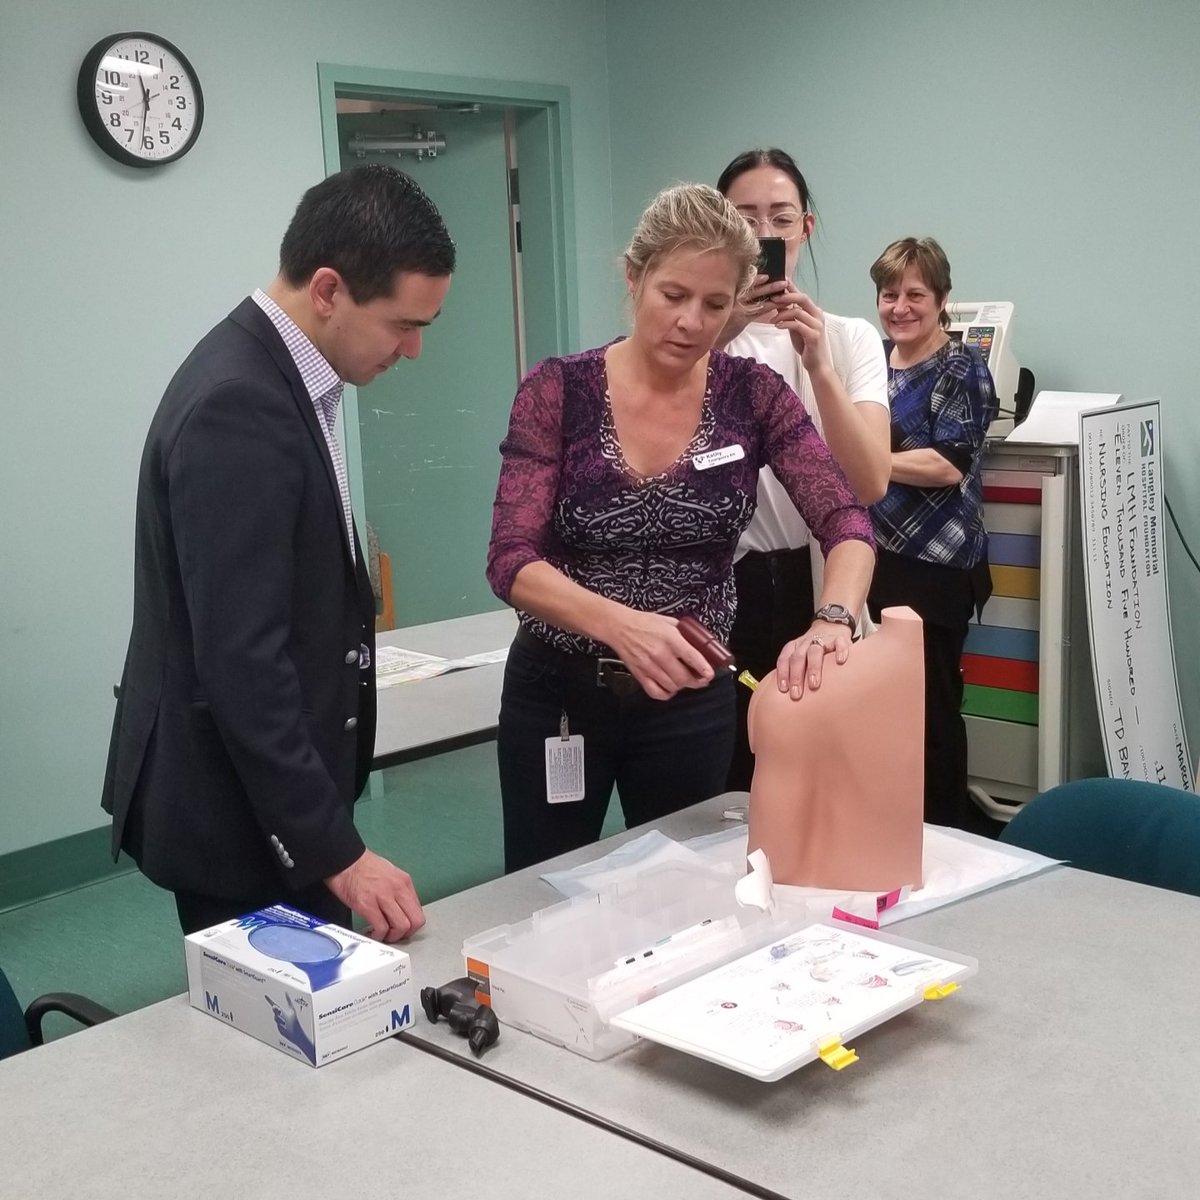 A great morning spent seeing how our OneTD donation dollars are put to good use with hands-on training equipment at Langley Memorial Hospital. #FraserValley
@GordonVerley @KellyLam_TD @CSir_TD